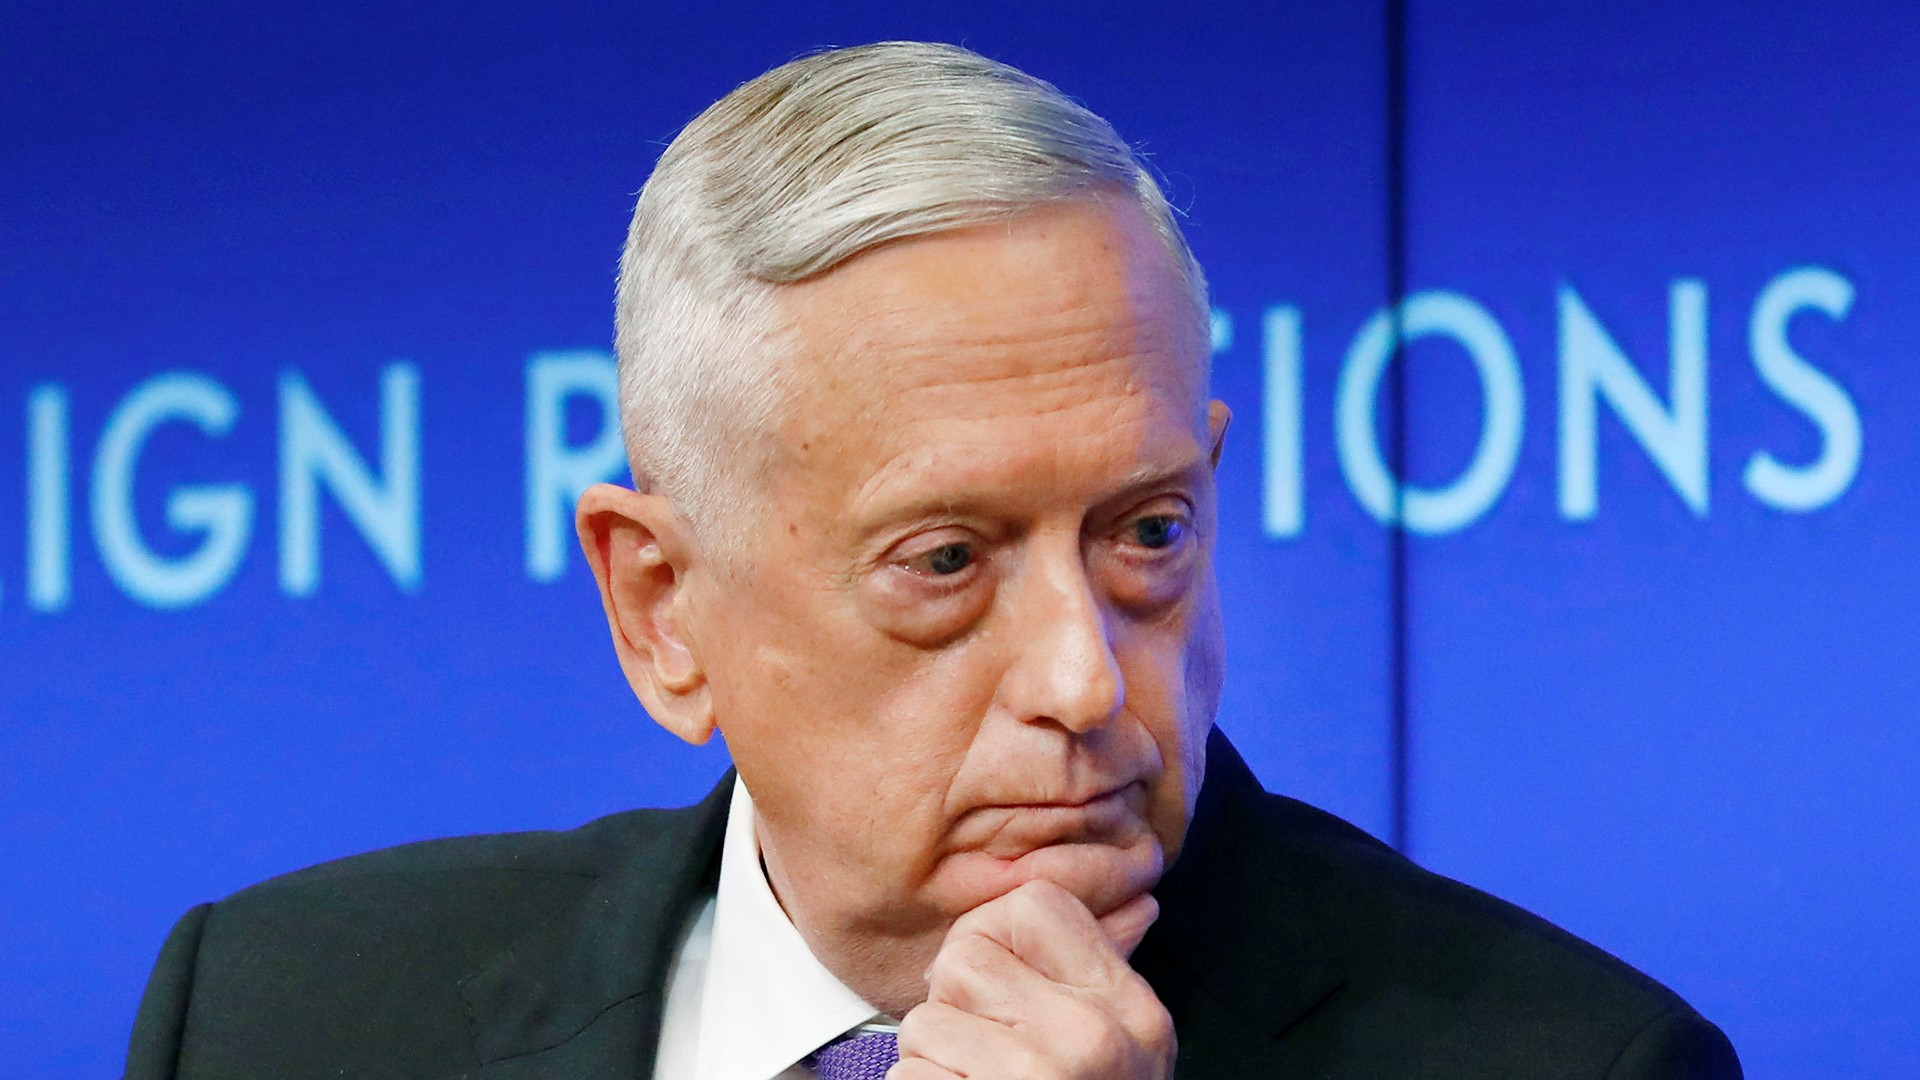 The normally reserved former defense secretary wrote that he never dreamed troops might be ordered to violate the Constitutional rights of citizens.